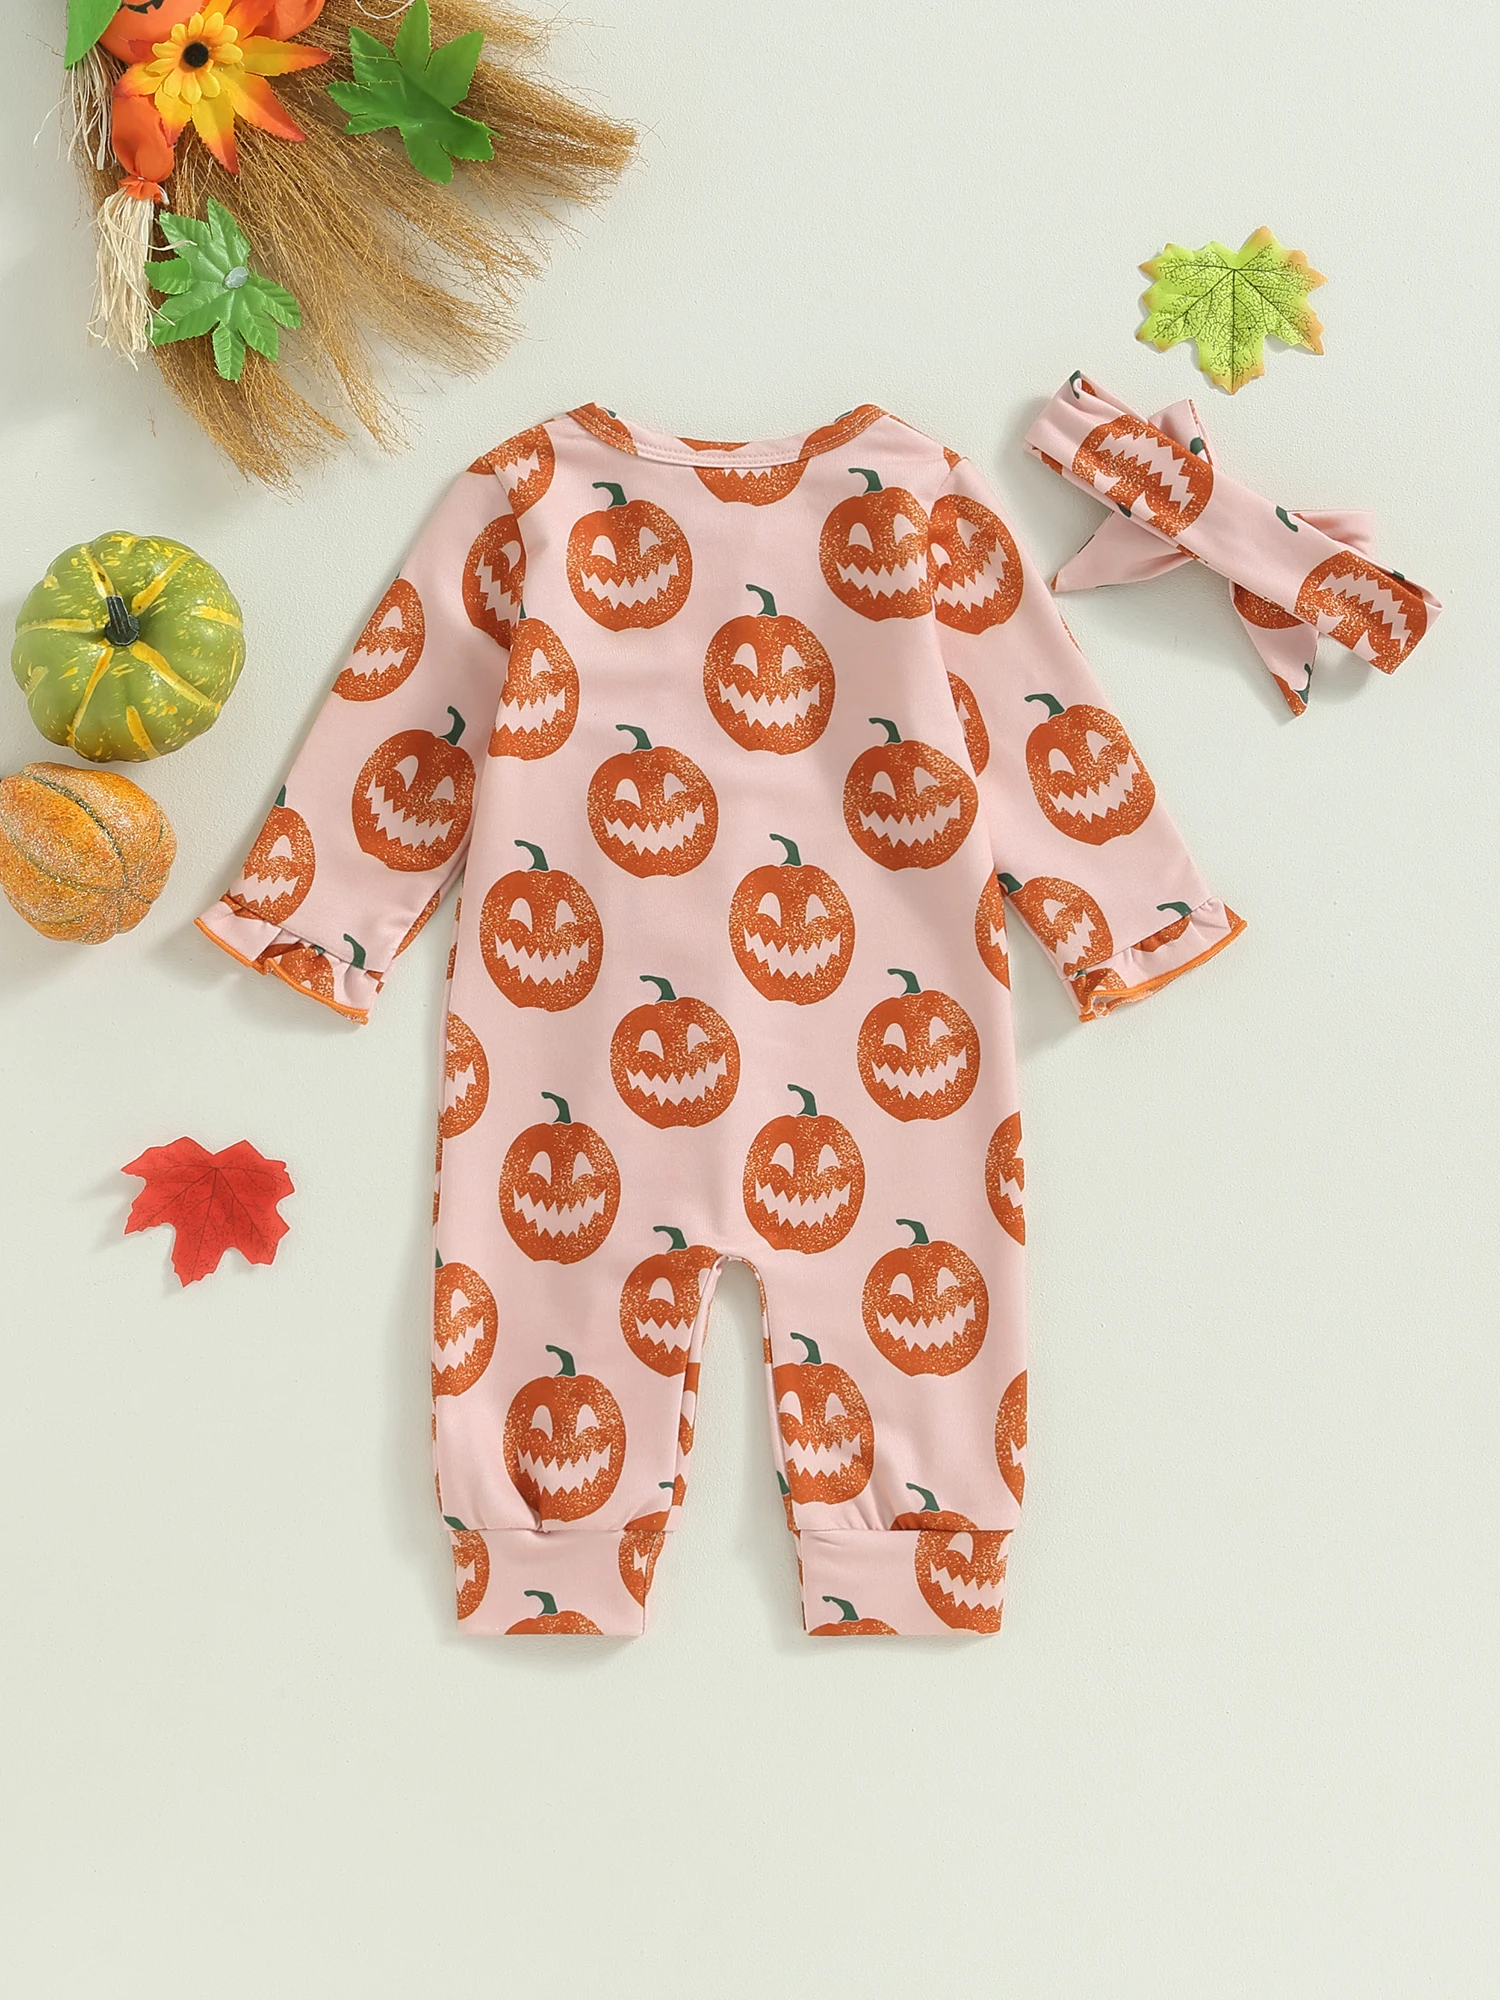 

Adorable Infant Strawberry Print Footless Pajama Romper with Zipper Closure and Long Sleeves for Cozy Nights - Perfect Newborn